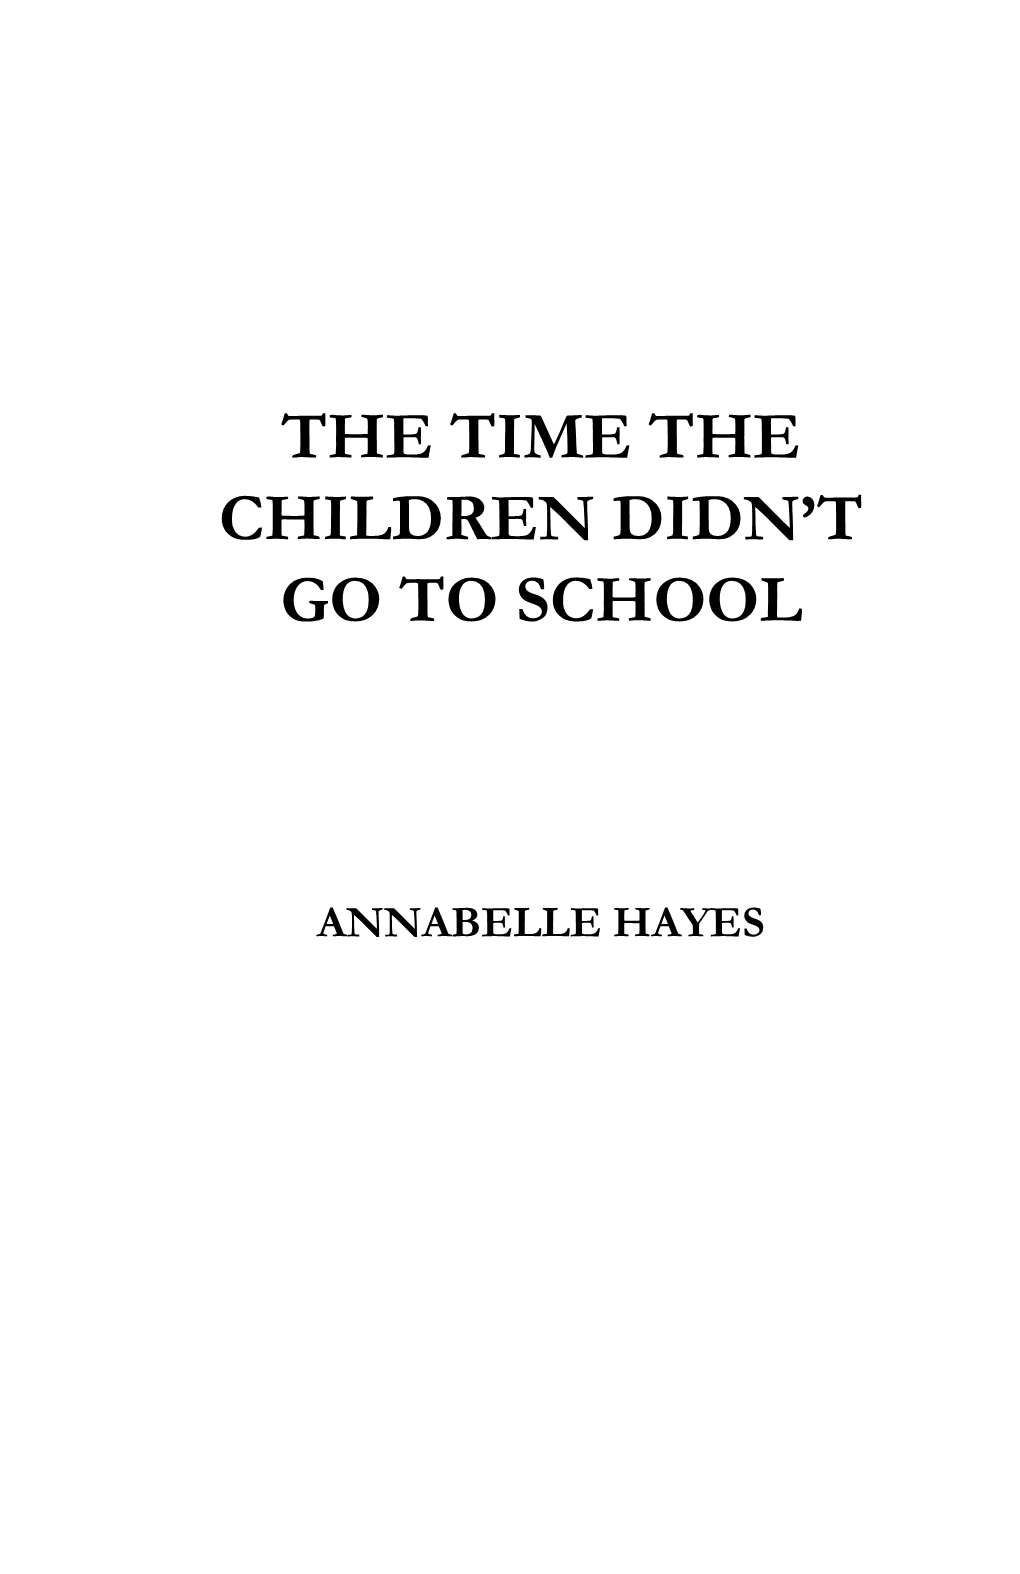 The Time the Children Didn't Go to School